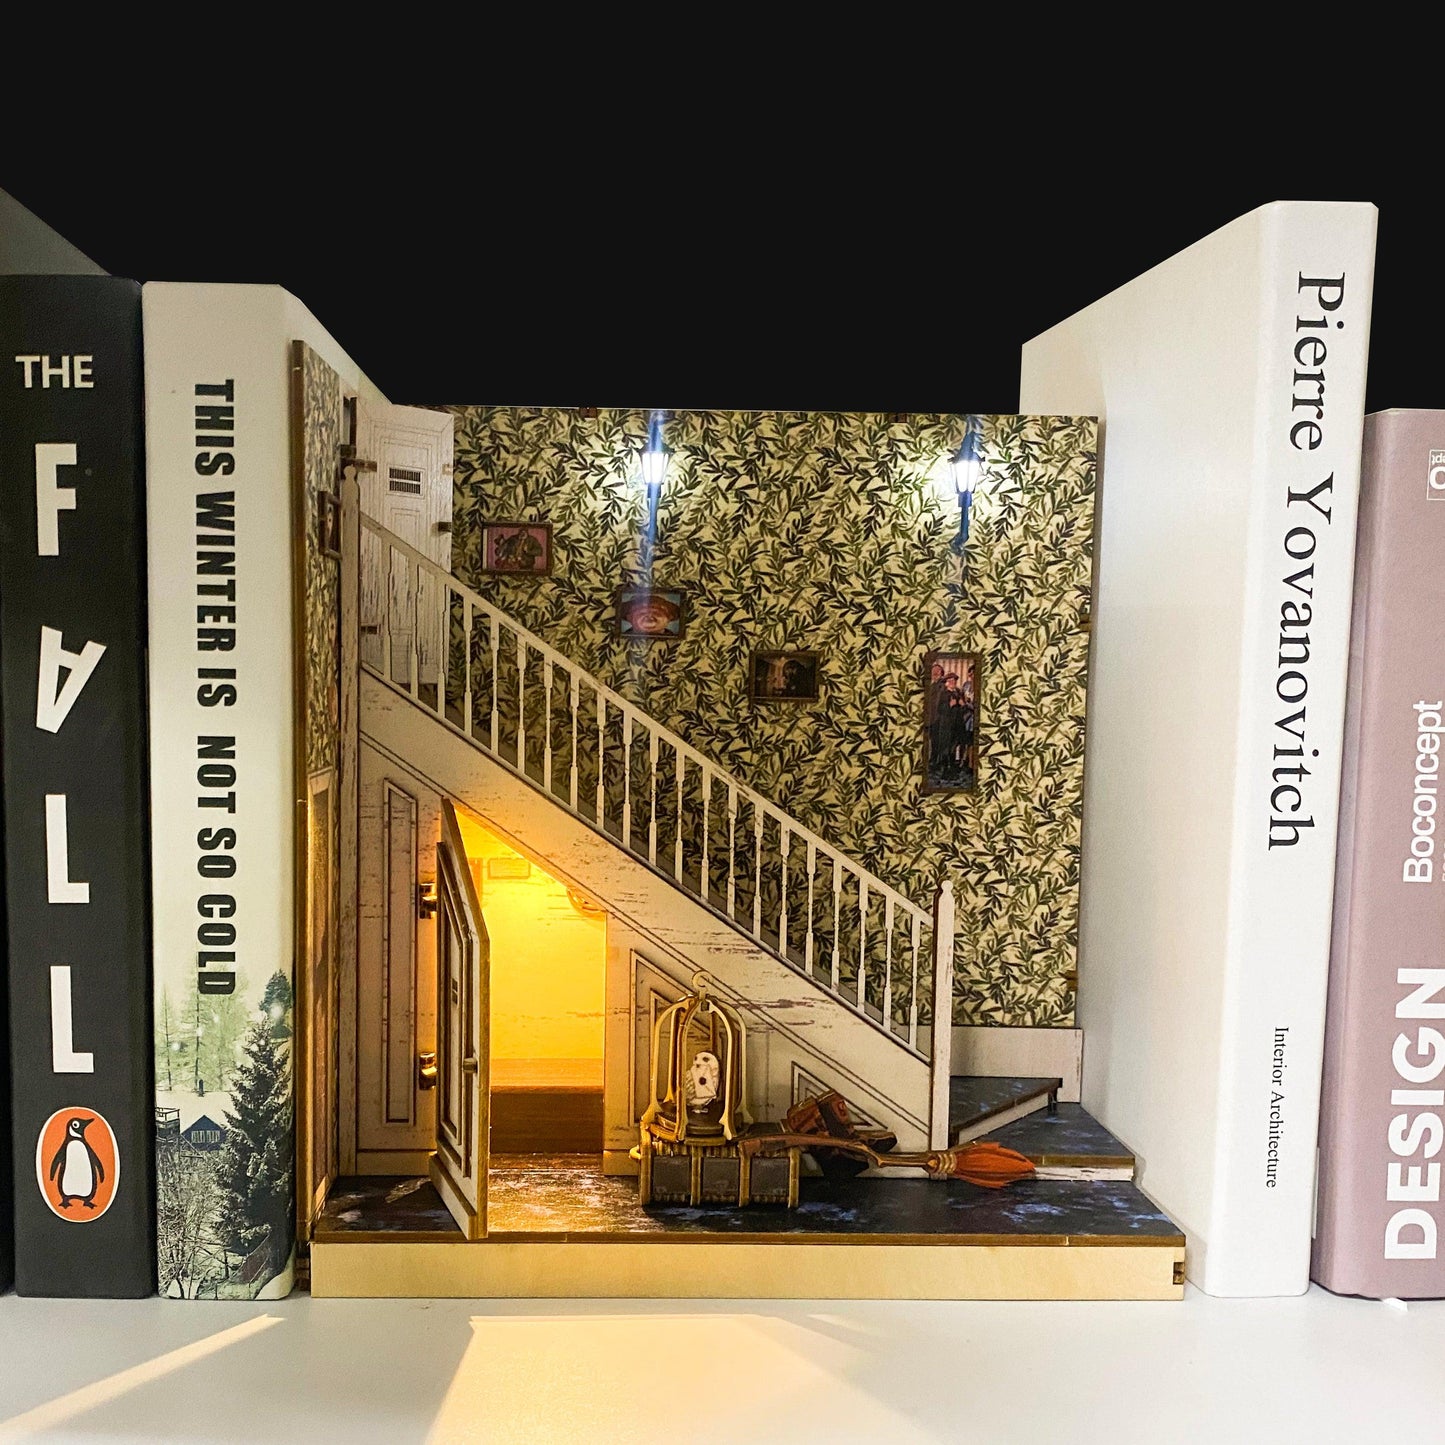 The Cupboard Under Stairs Book Nook - DIY Book Nook Kits - 4 Privet Drive House Book Nook - Dursley's House Book Nook - Dudley Room Book Nook Wizard Alley Book Nooks Magic Alley Book Shelf Insert Book Scenery with LED - Rajbharti Crafts